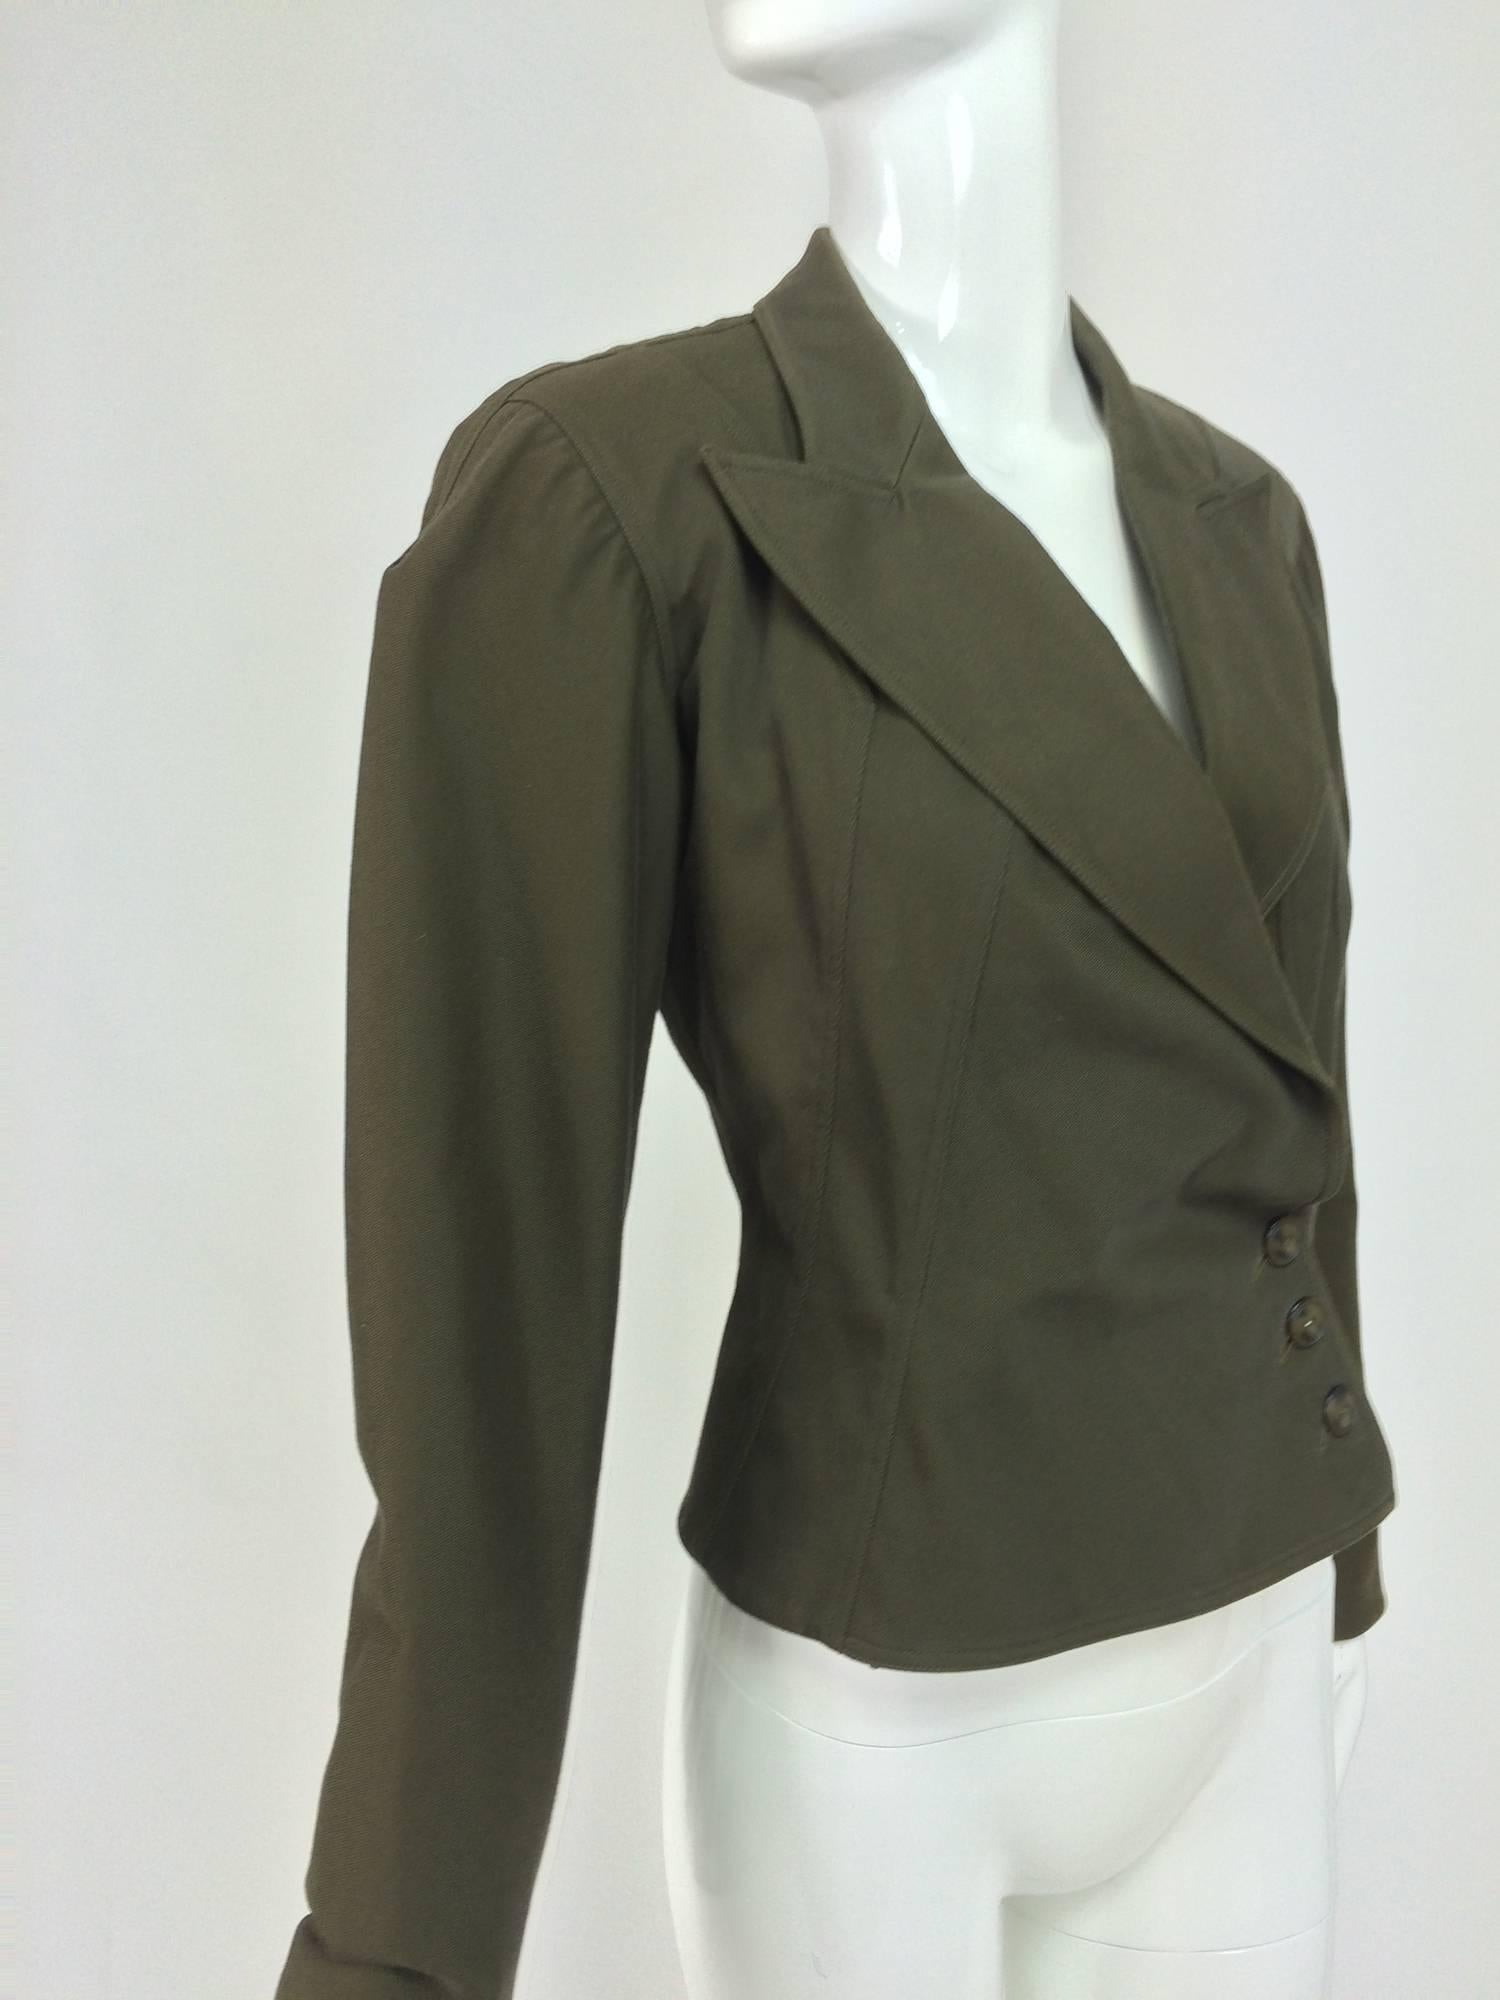 Alaia olive green fitted side front button jacket 1980s...Raglan sleeve jacket has a deep neckline with wide lapels...Seamed to a fitted waist and flares at the hem...Back waist seaming...The jacket closes at the front side with buttons (interior